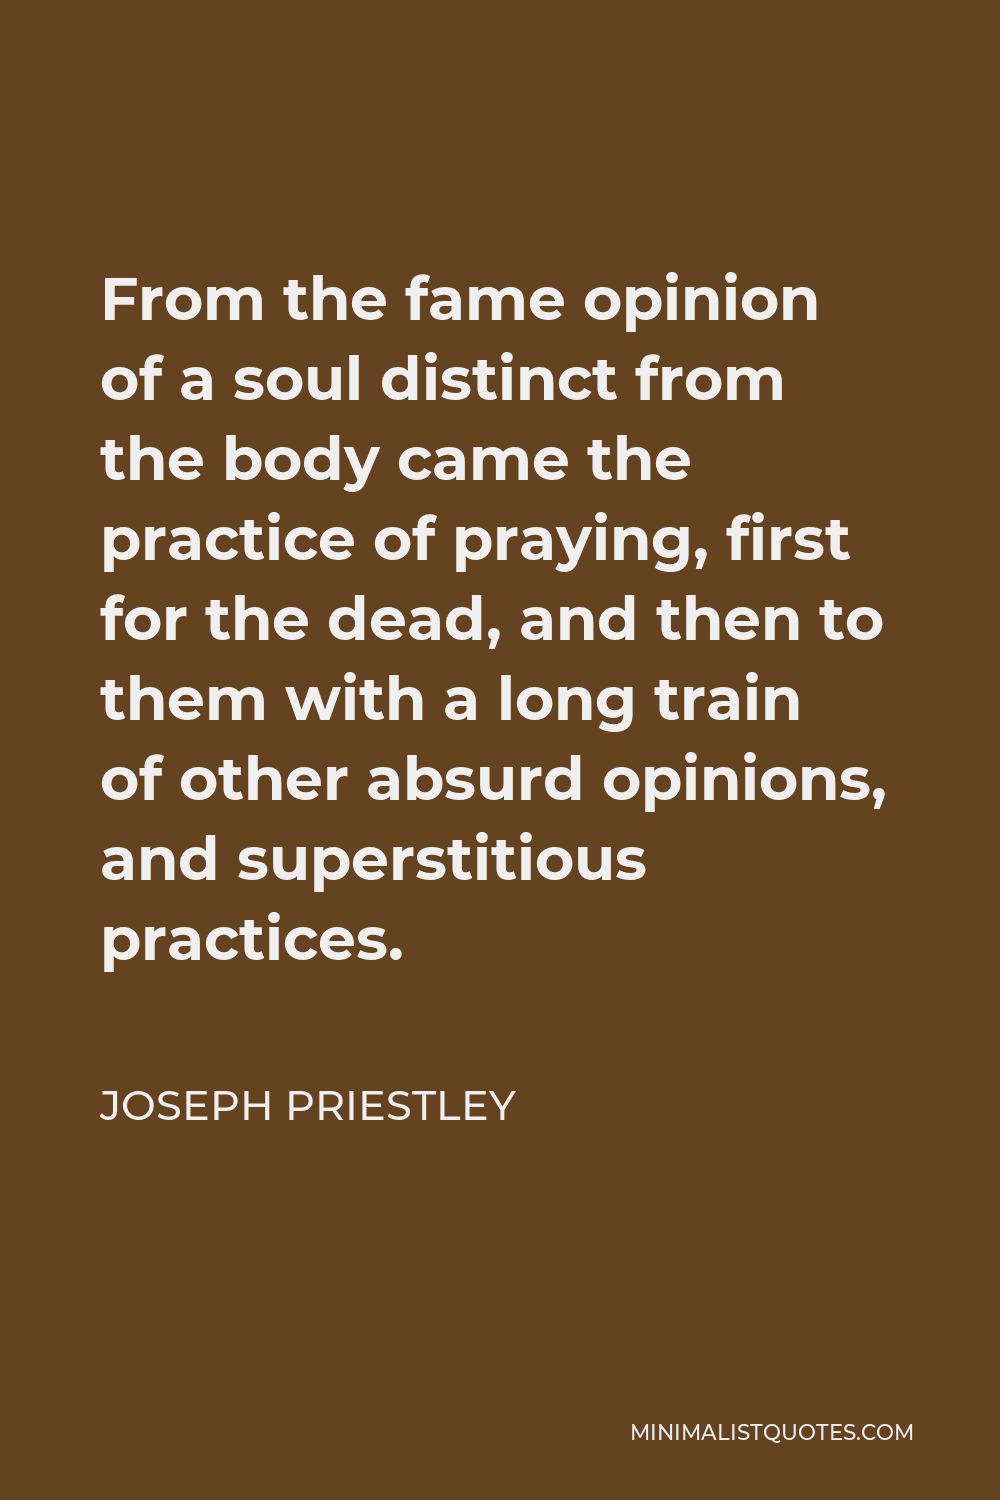 Joseph Priestley Quote - From the fame opinion of a soul distinct from the body came the practice of praying, first for the dead, and then to them with a long train of other absurd opinions, and superstitious practices.